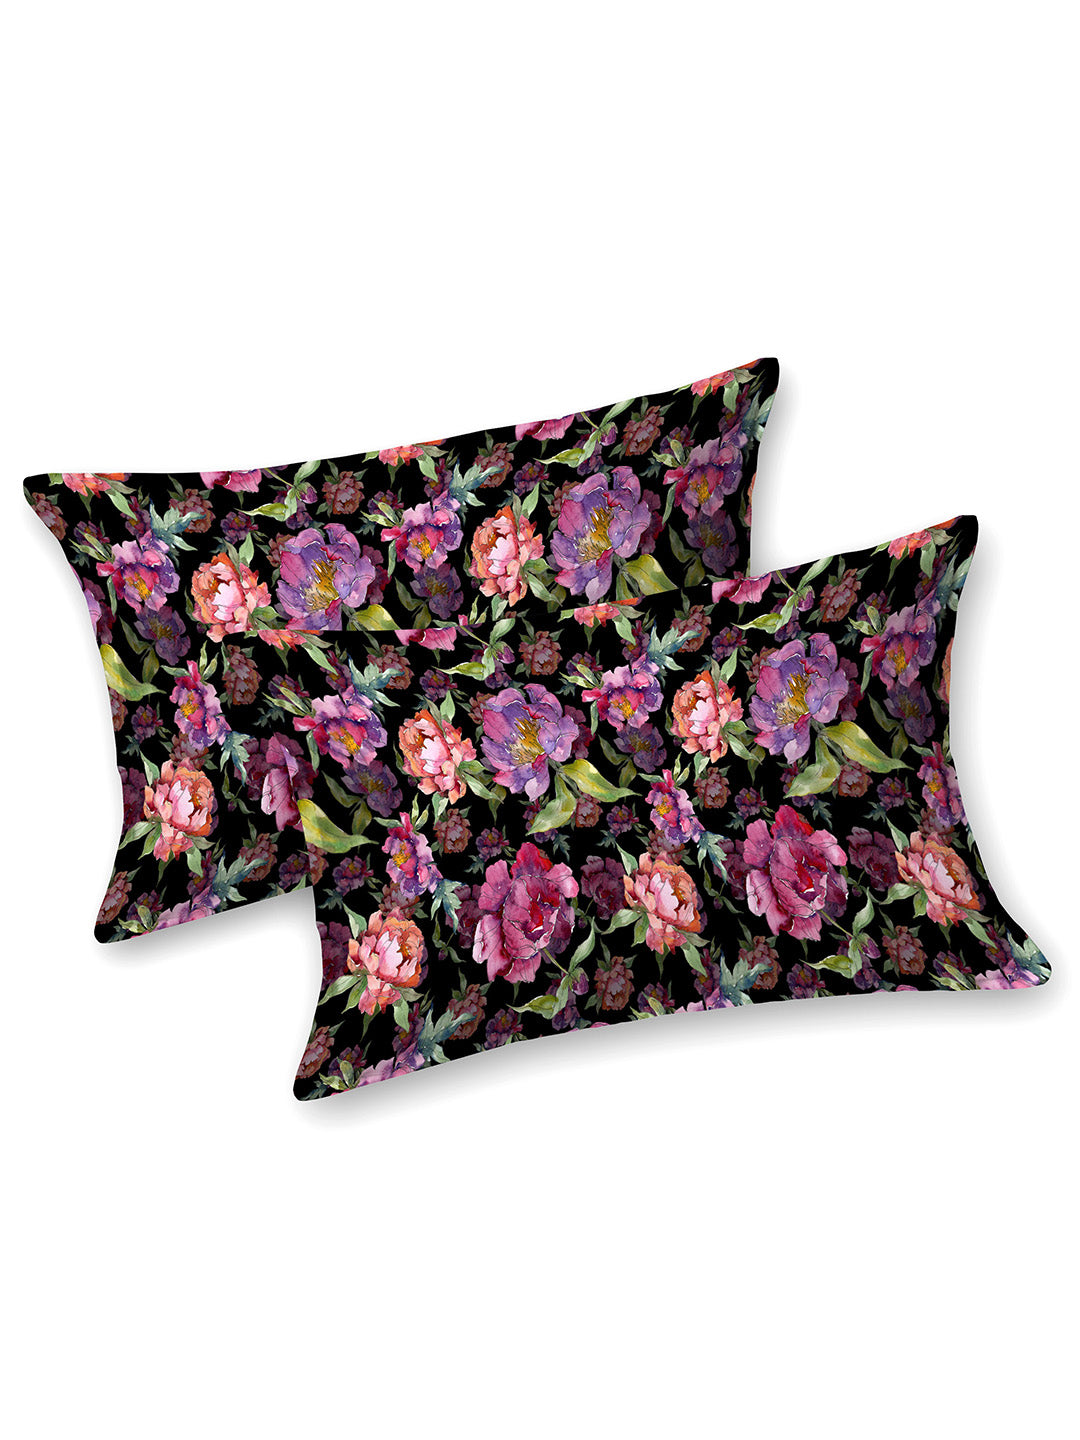 Black and Fuschia Floral Print Double King Cotton Bed Cover/Bed Spread